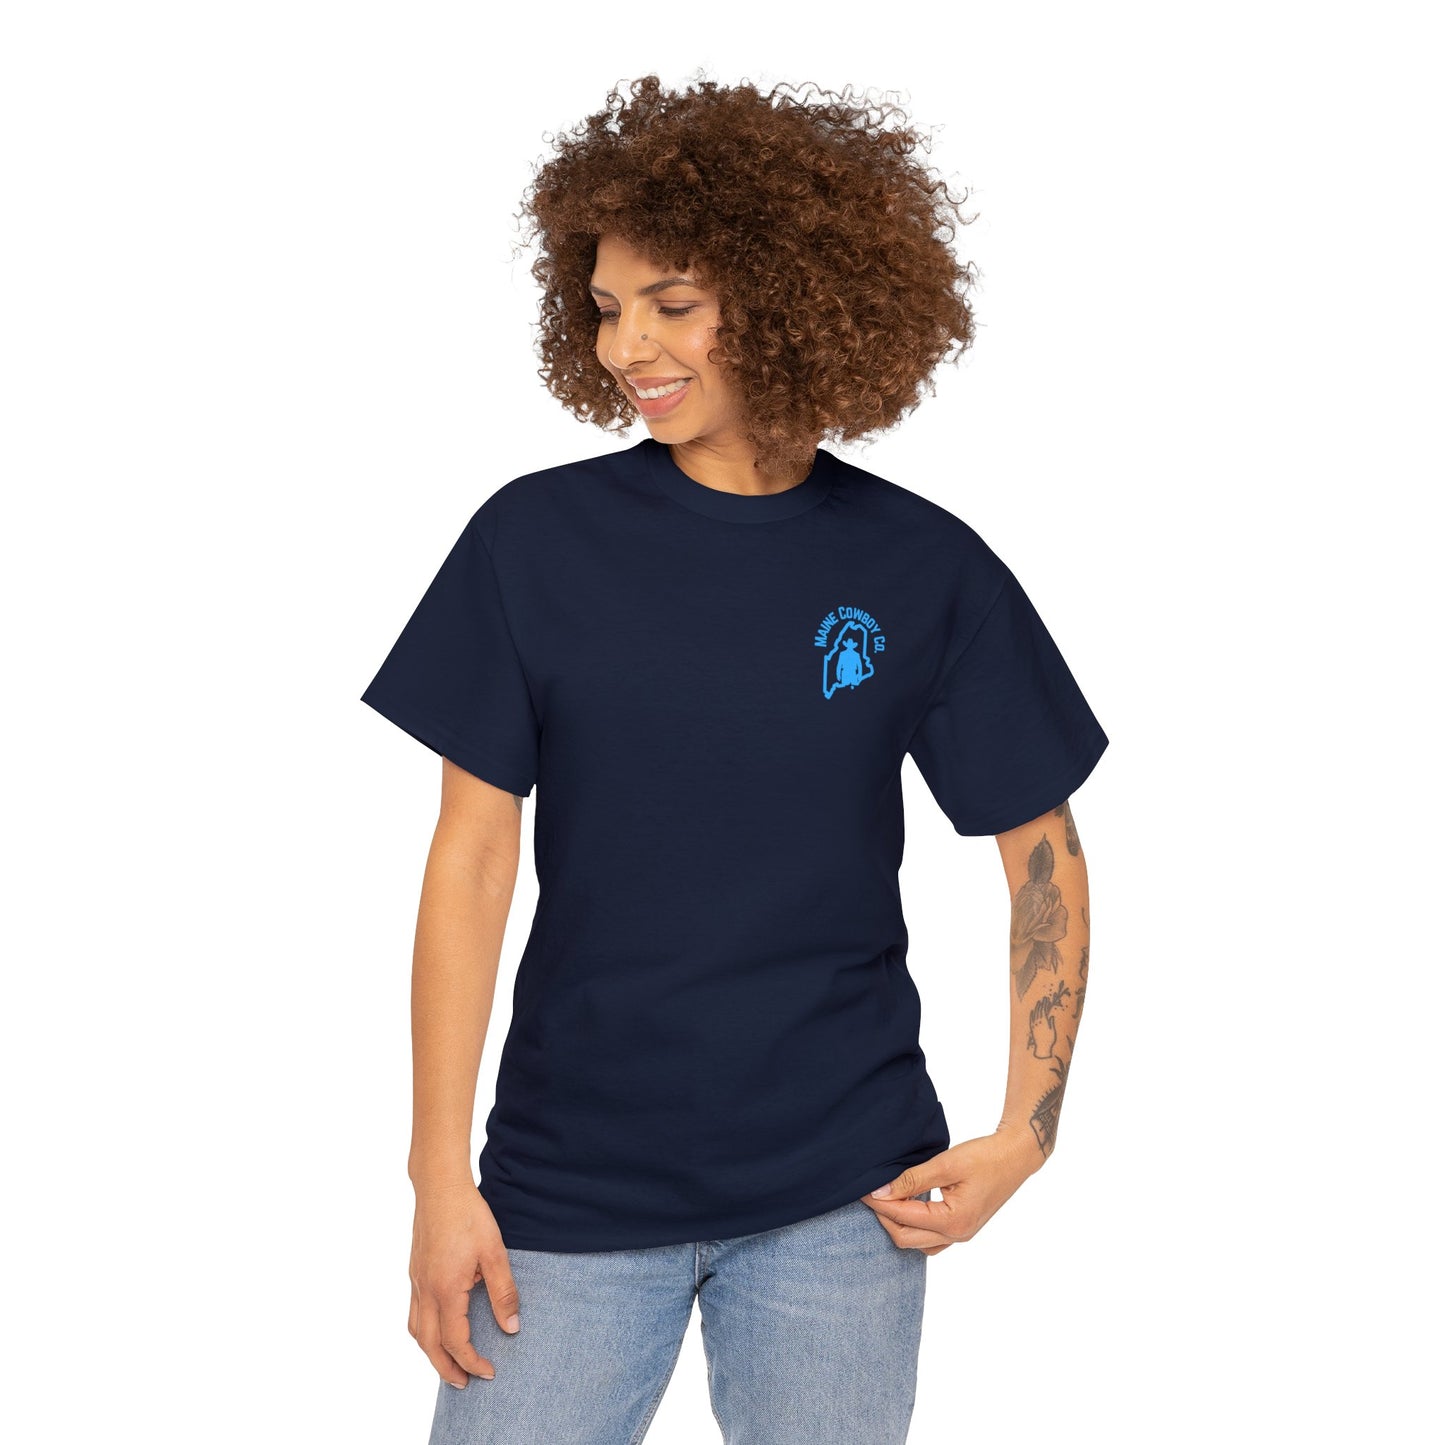 Route 1 Sign Tee